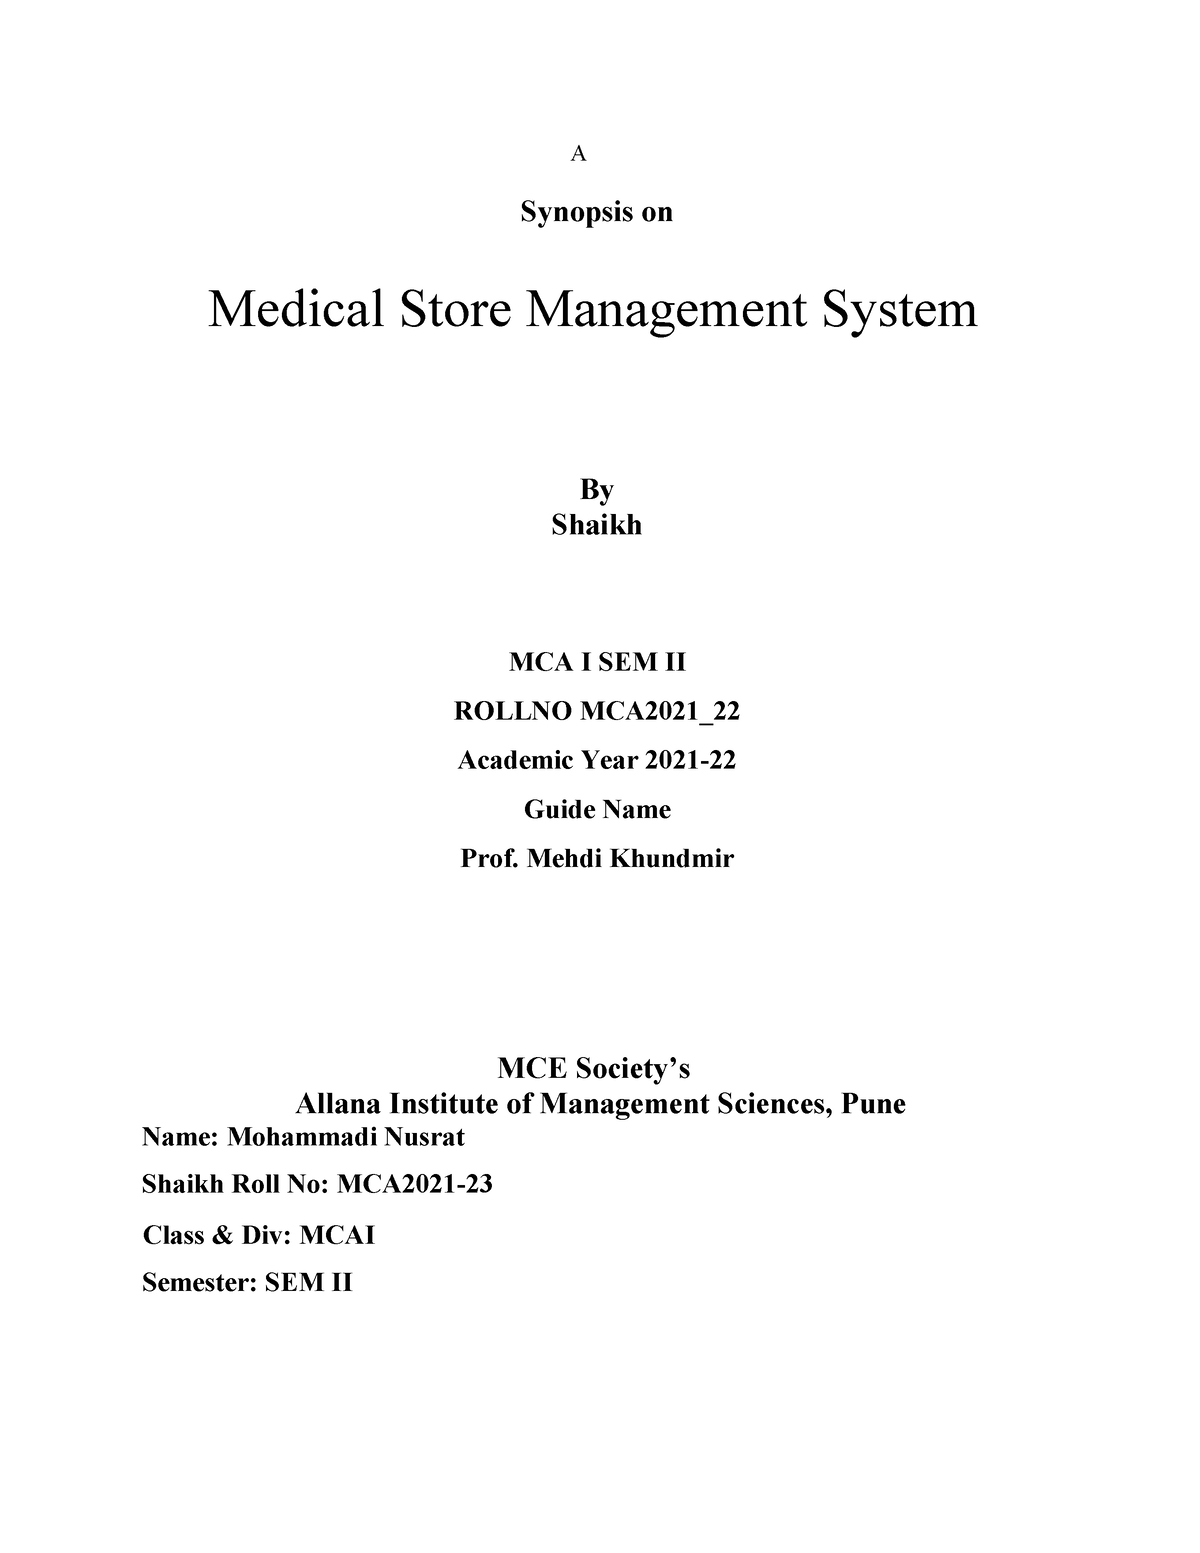 literature review of medical store management system